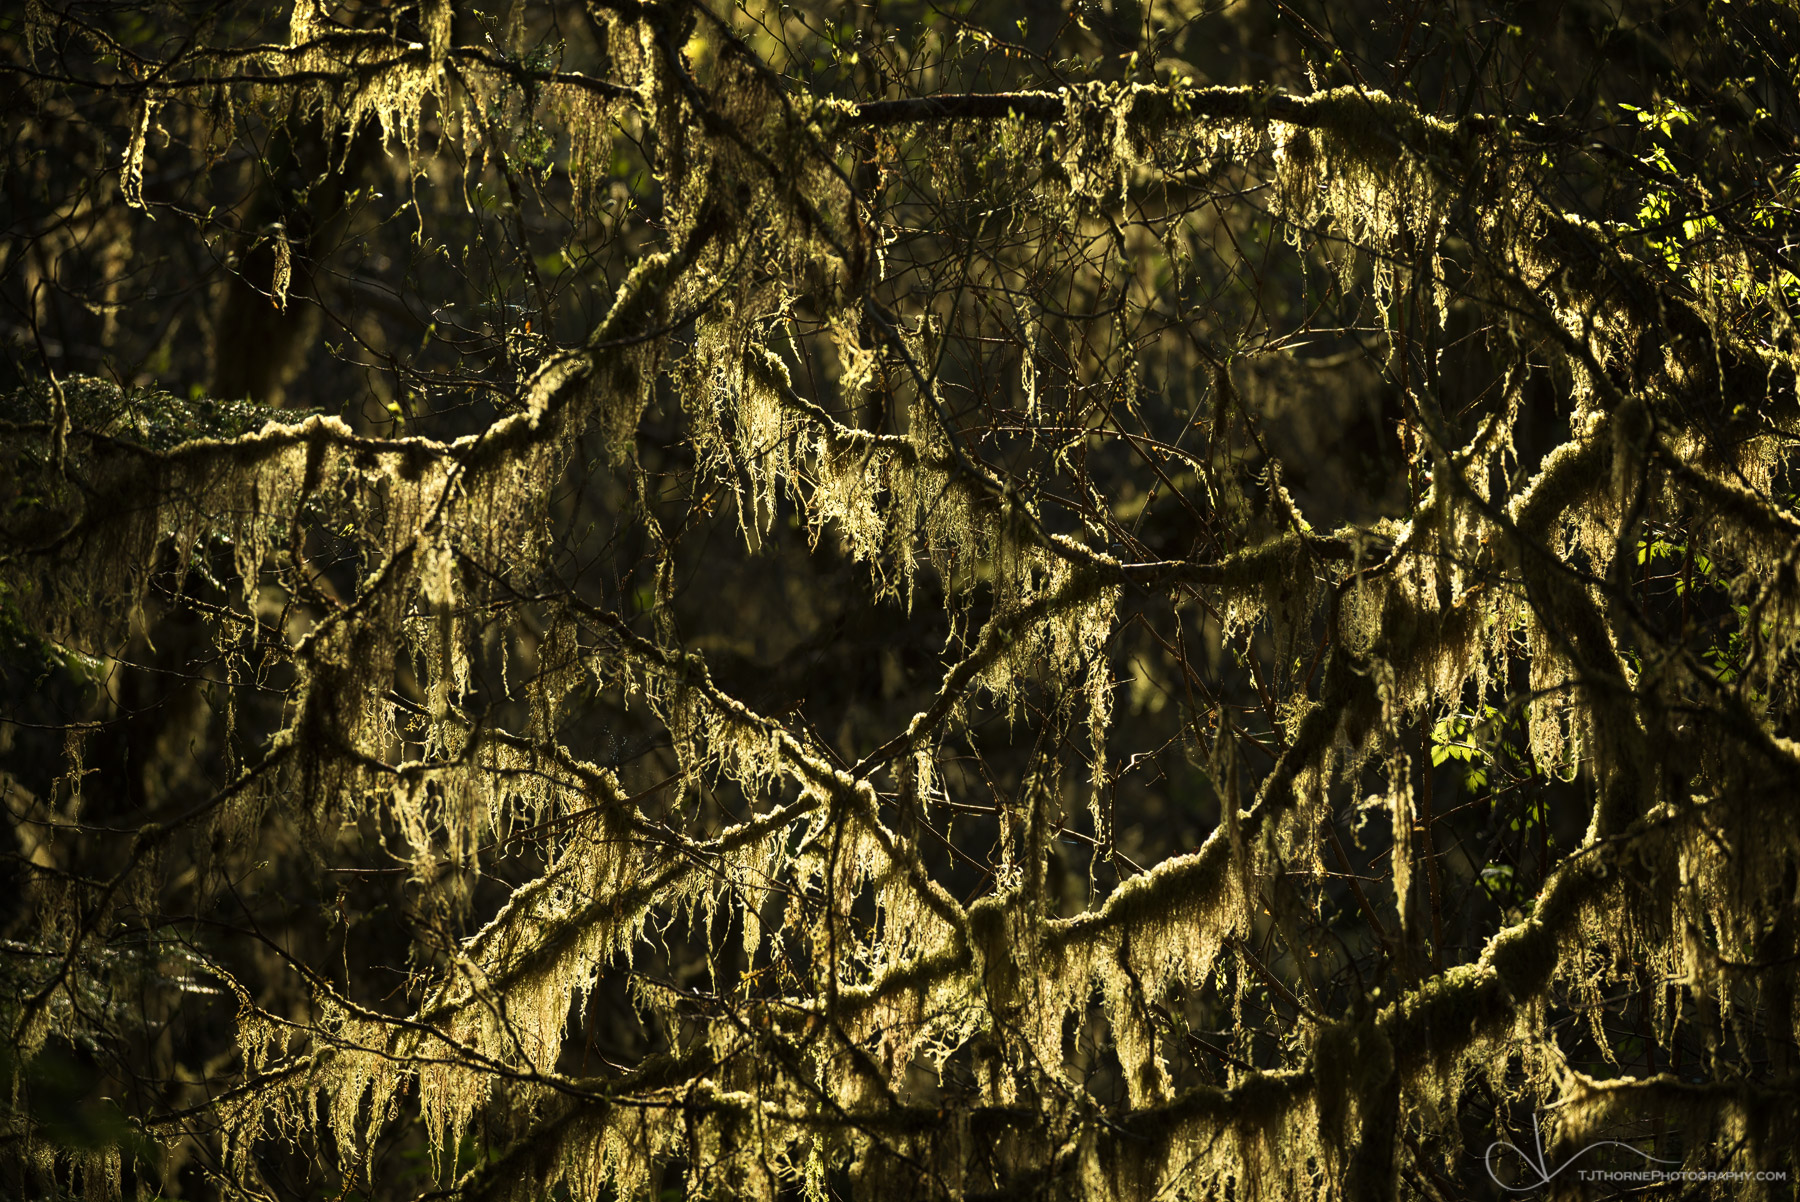 Backlit moss covered branches in a forest of Olympic National Park, Washington.